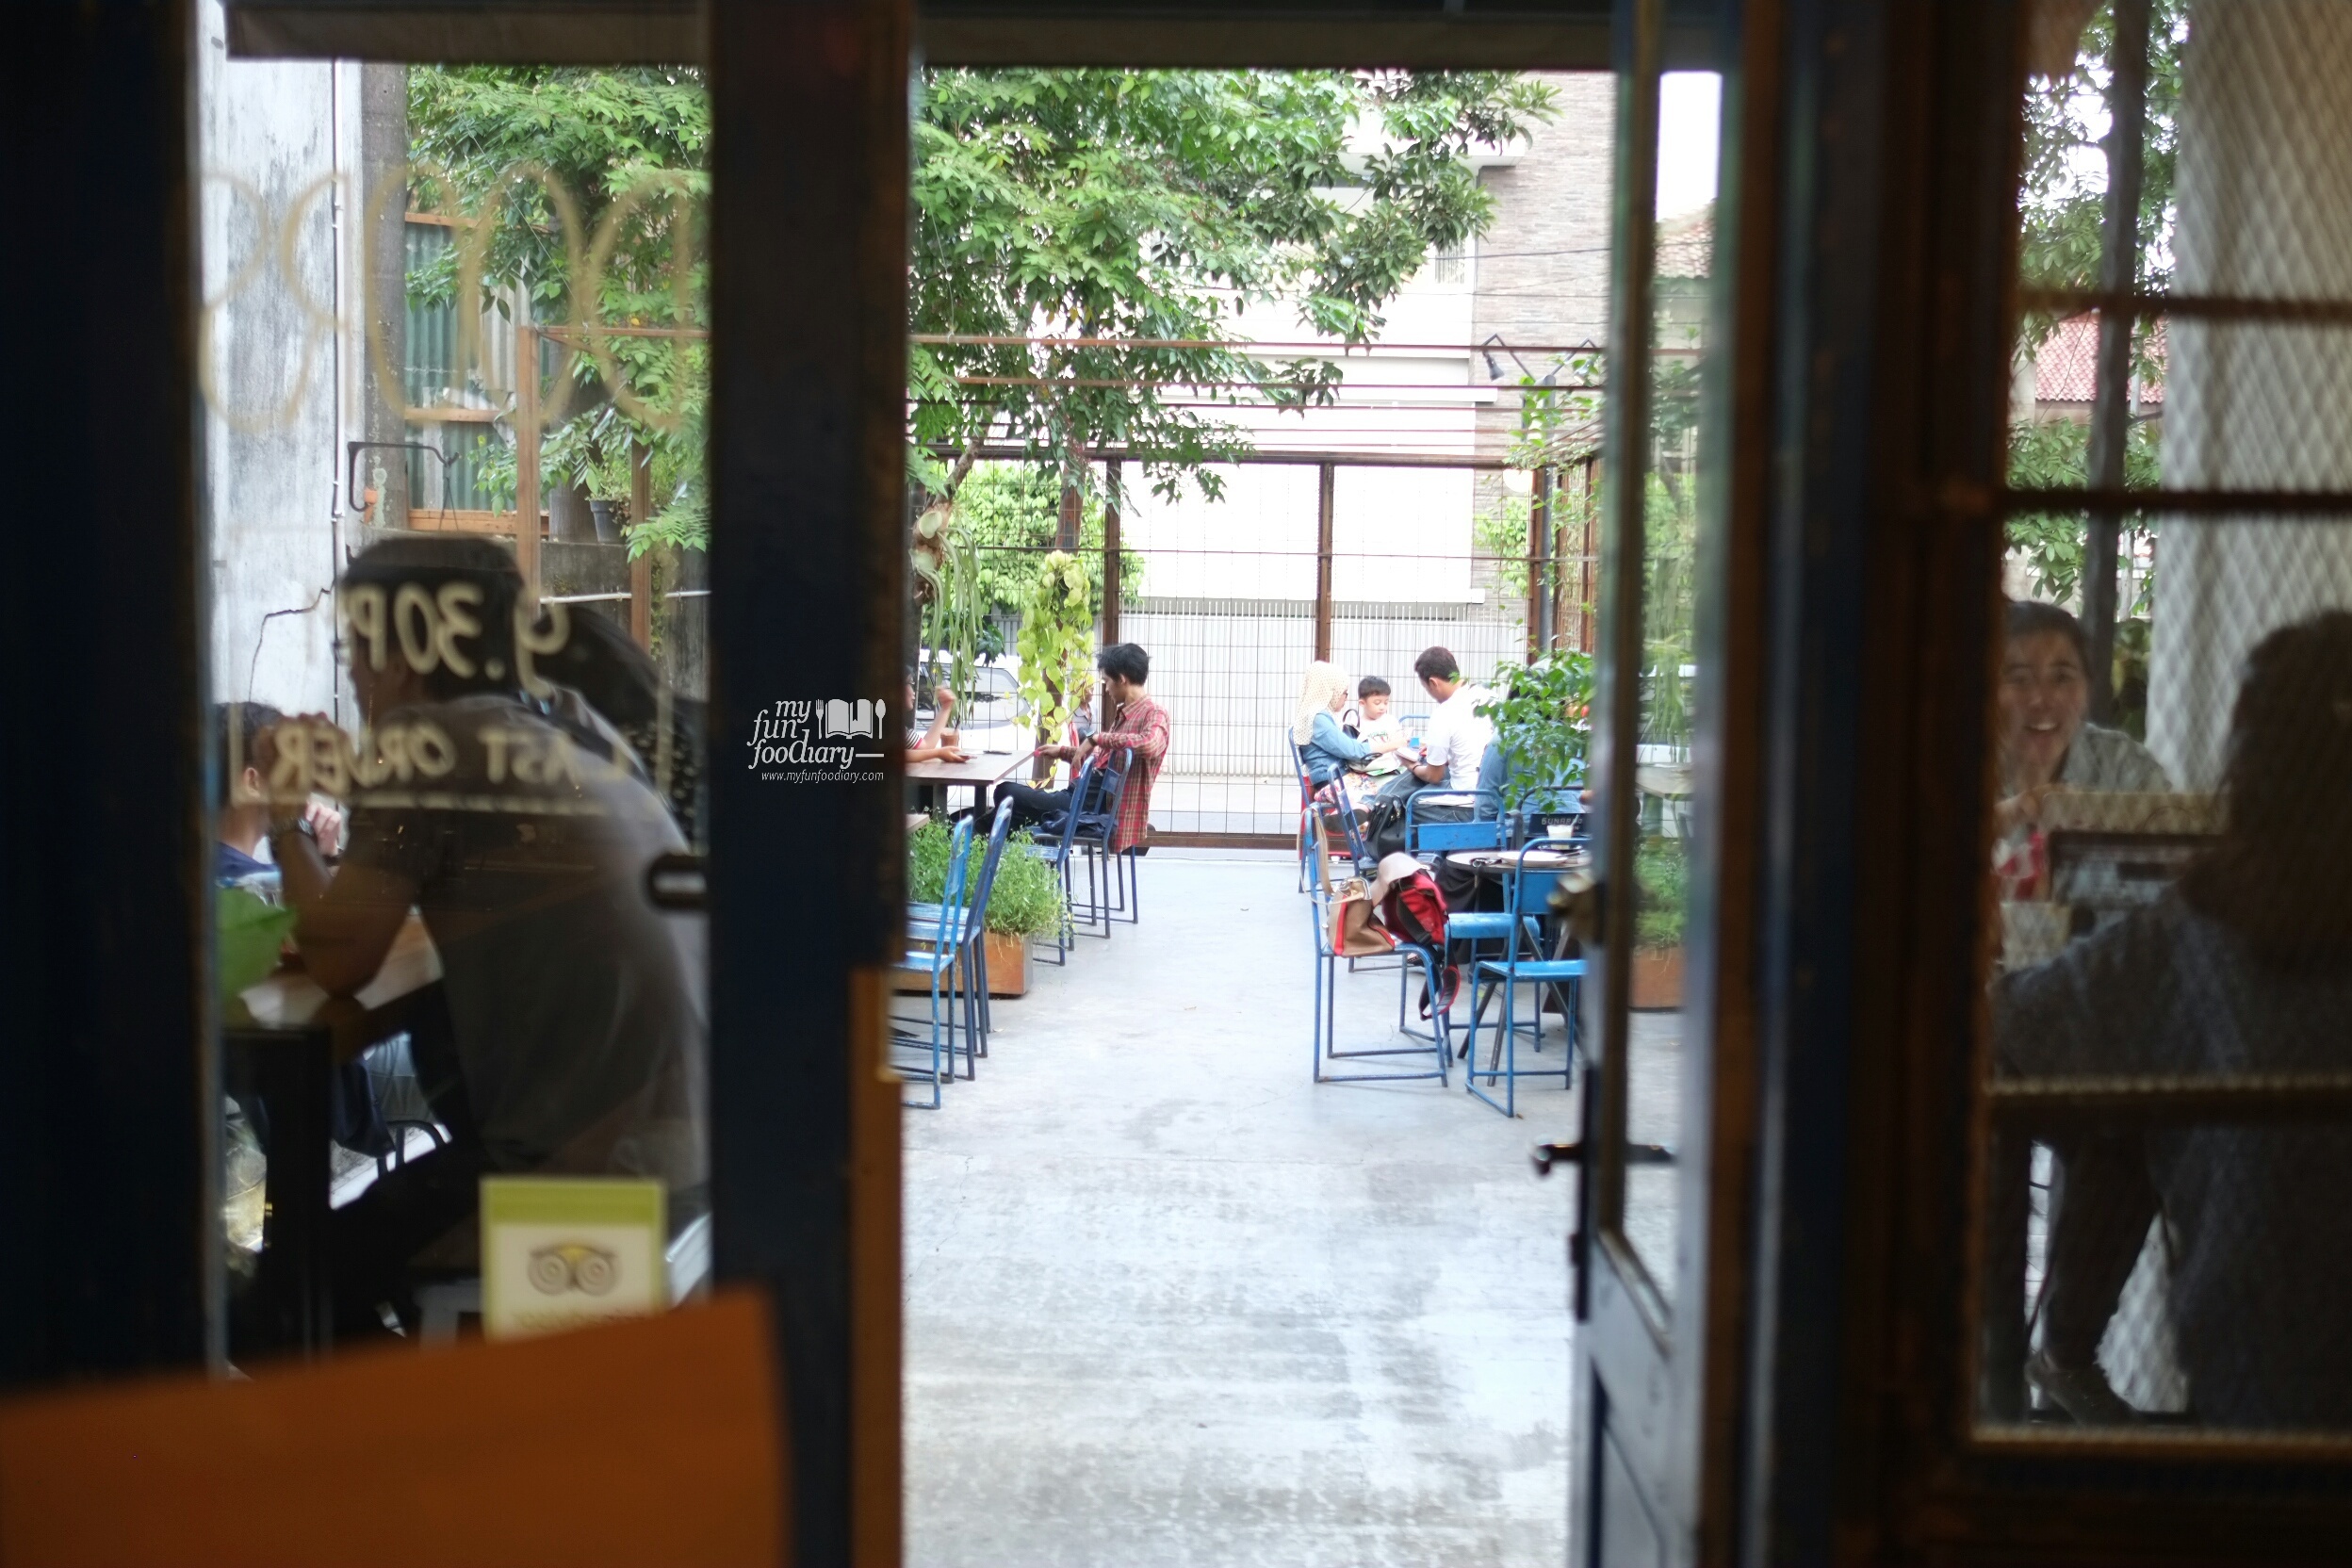 View To The Outdoor at Blue Doors Bandung by Myfunfoodiary